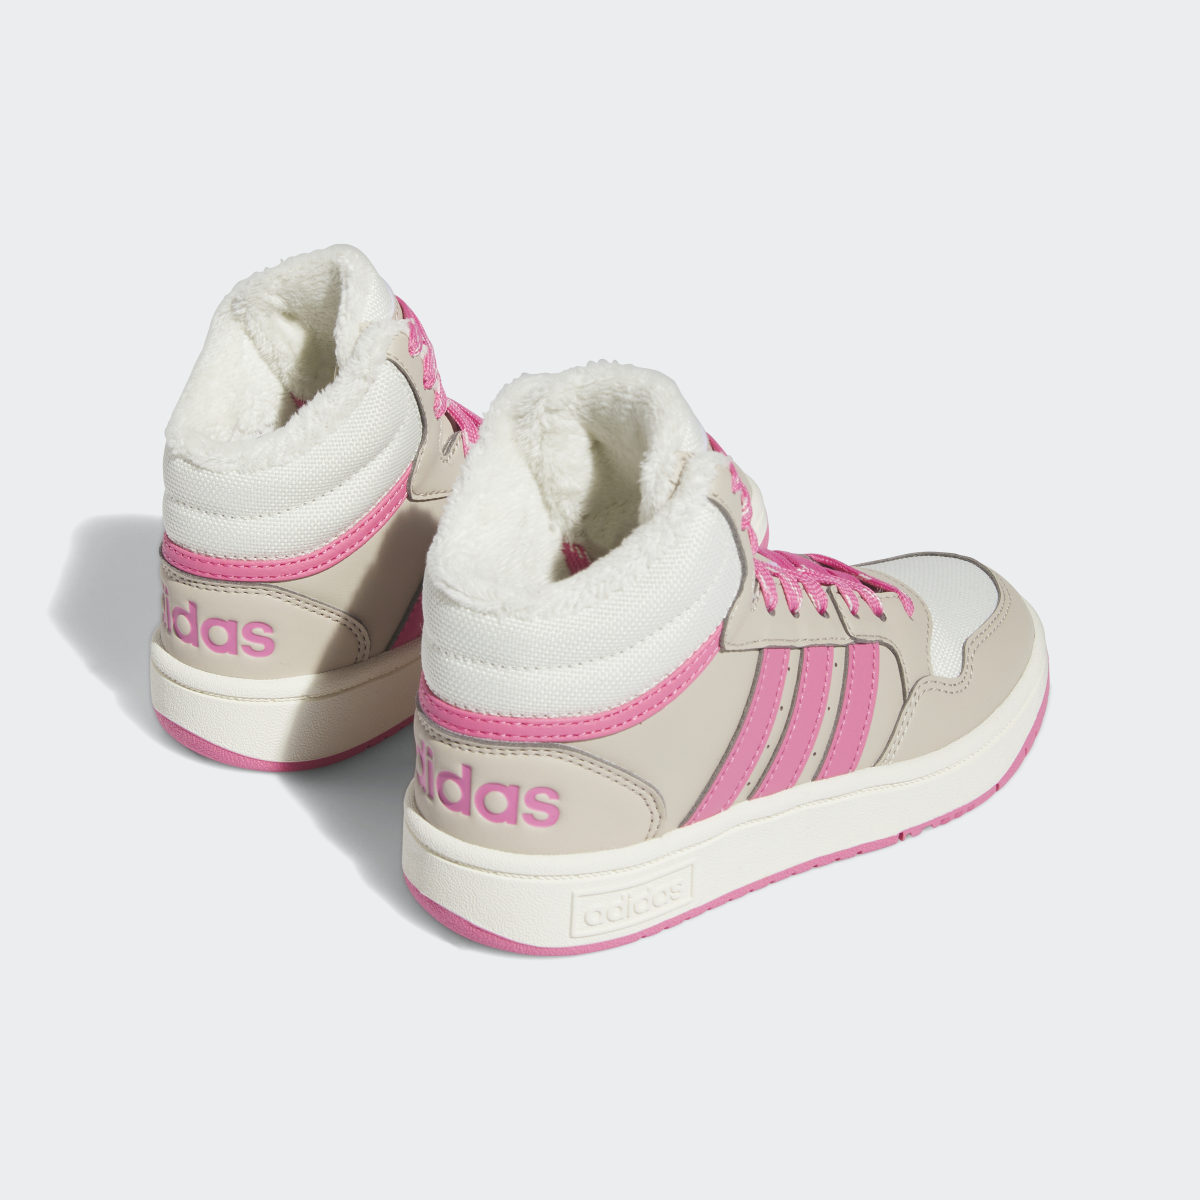 Adidas Hoops Mid 3.0 Shoes Kids. 5